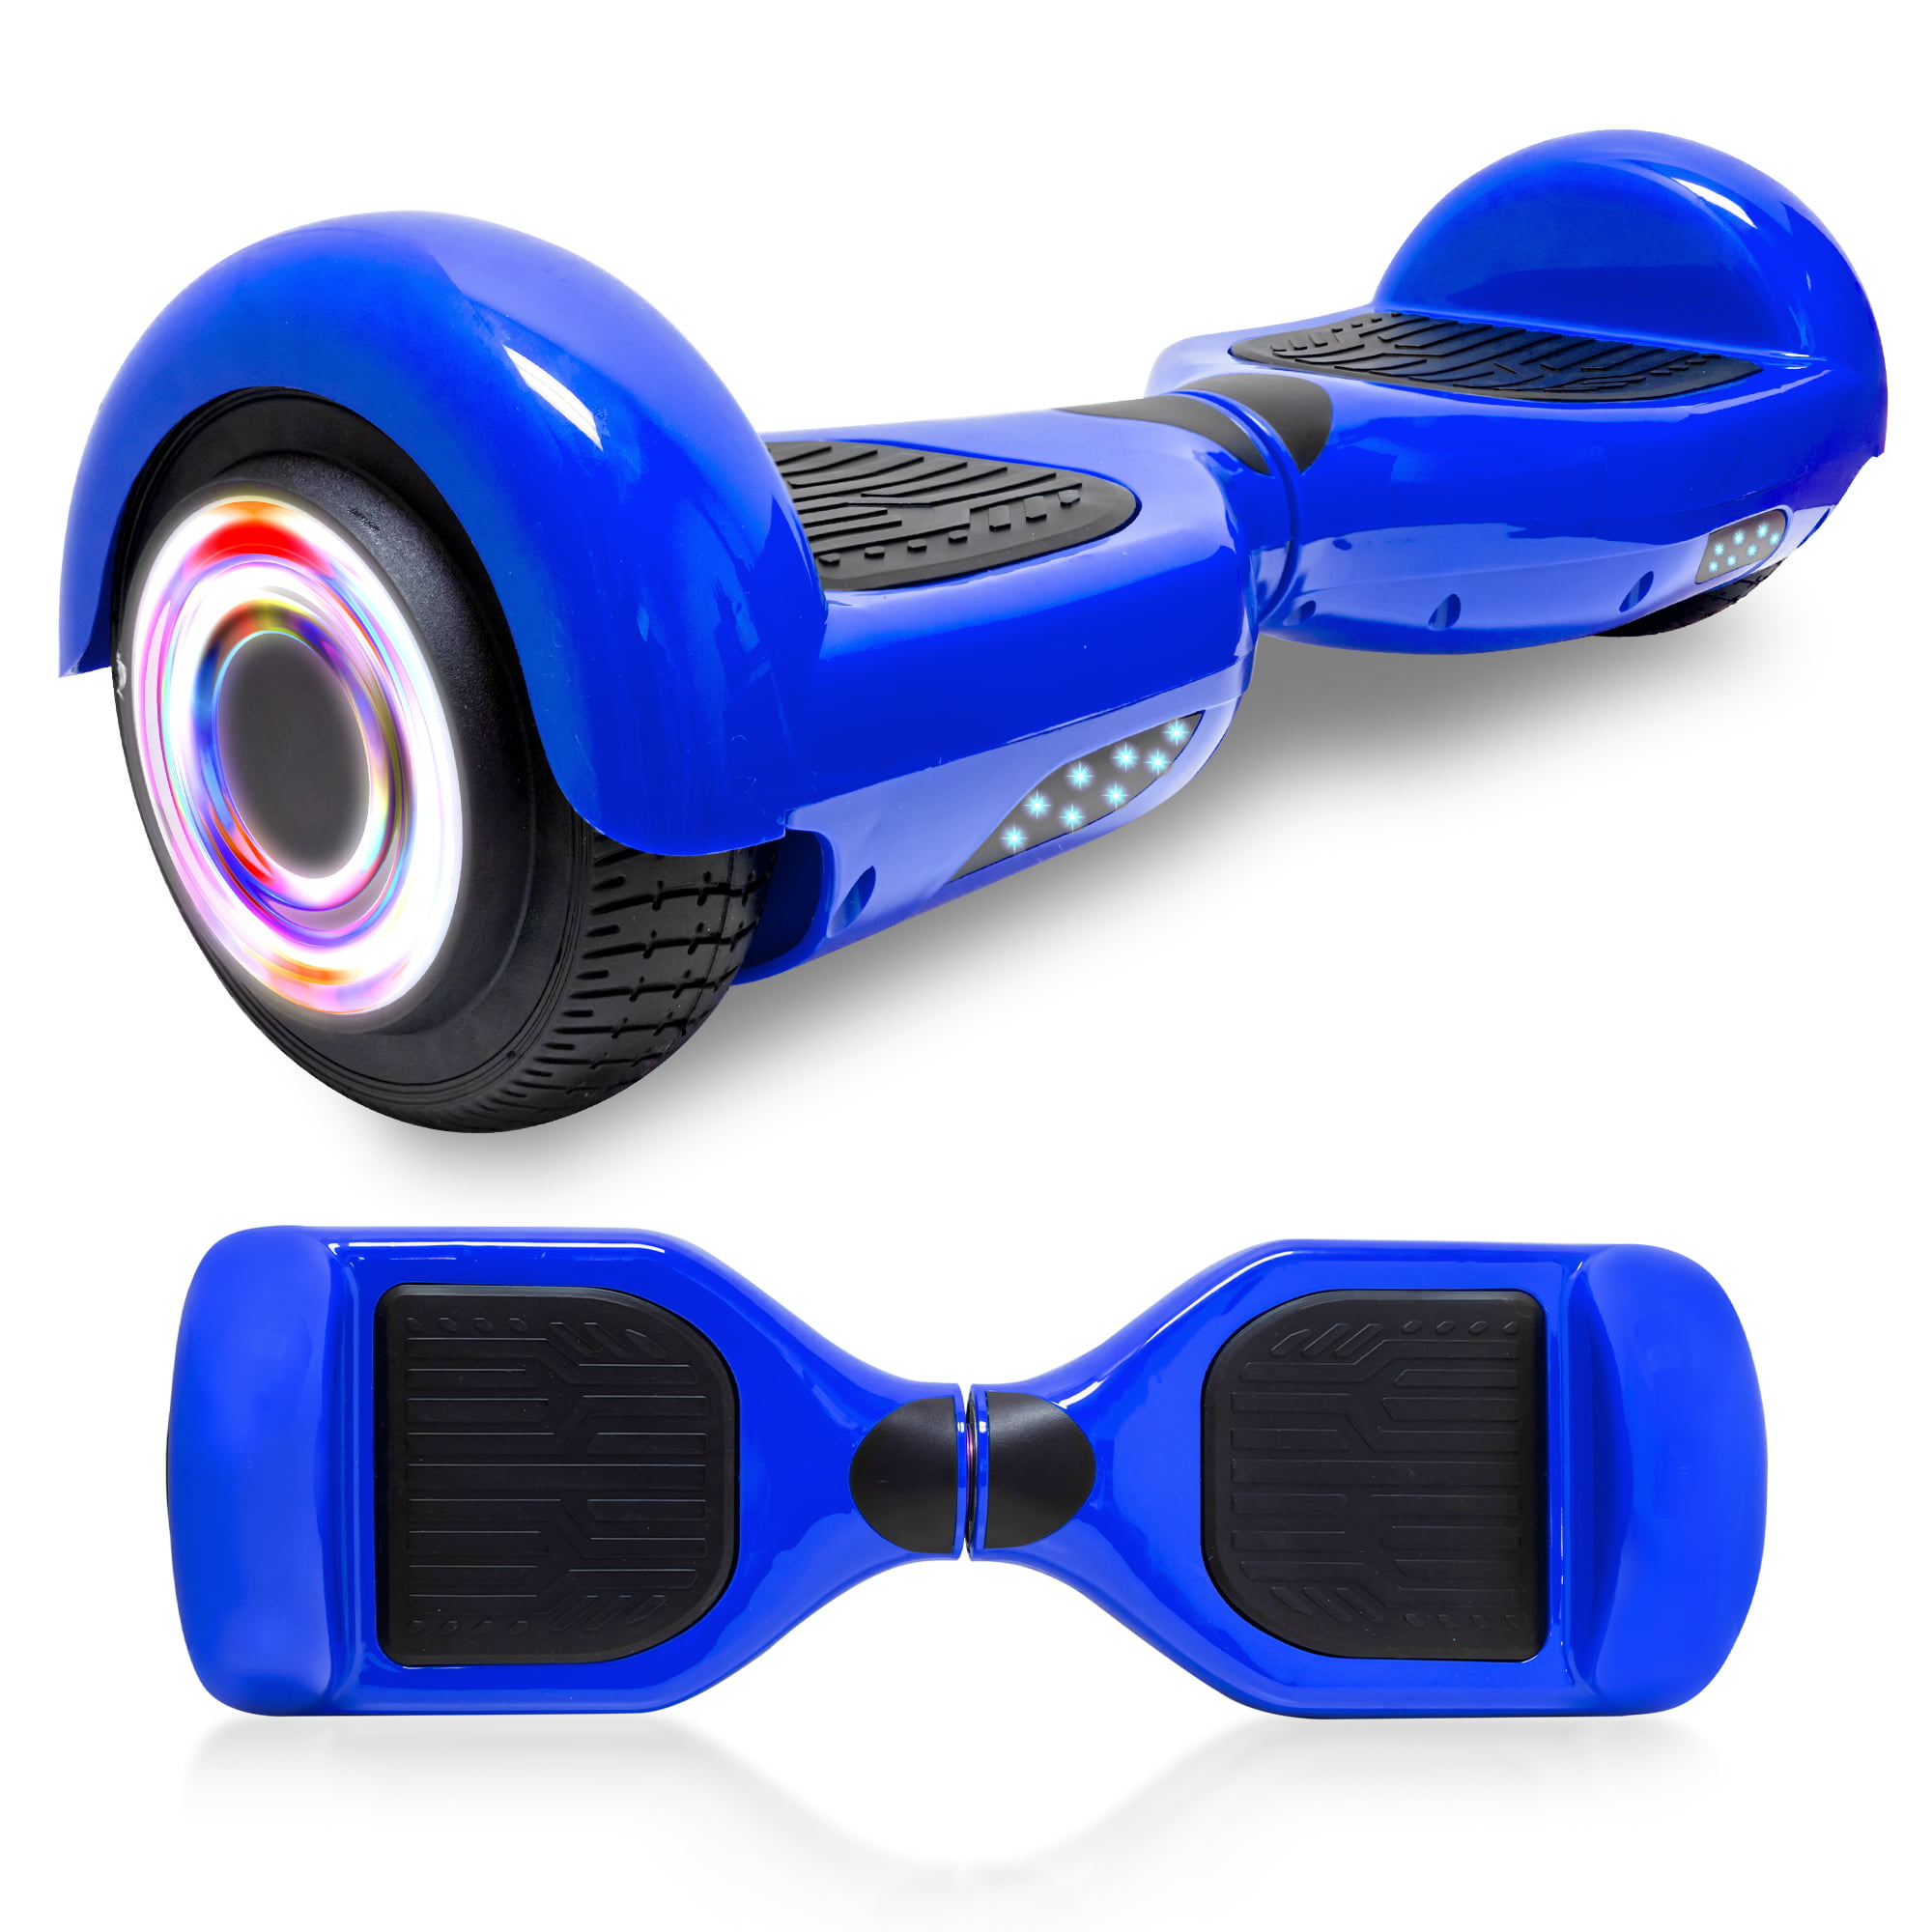 NHT Latest Generation Electric Hoverboard Build-in Bluetooth Speaker Electric Self Balancing Scooter Hover Board with LED Lights Safety Certified 